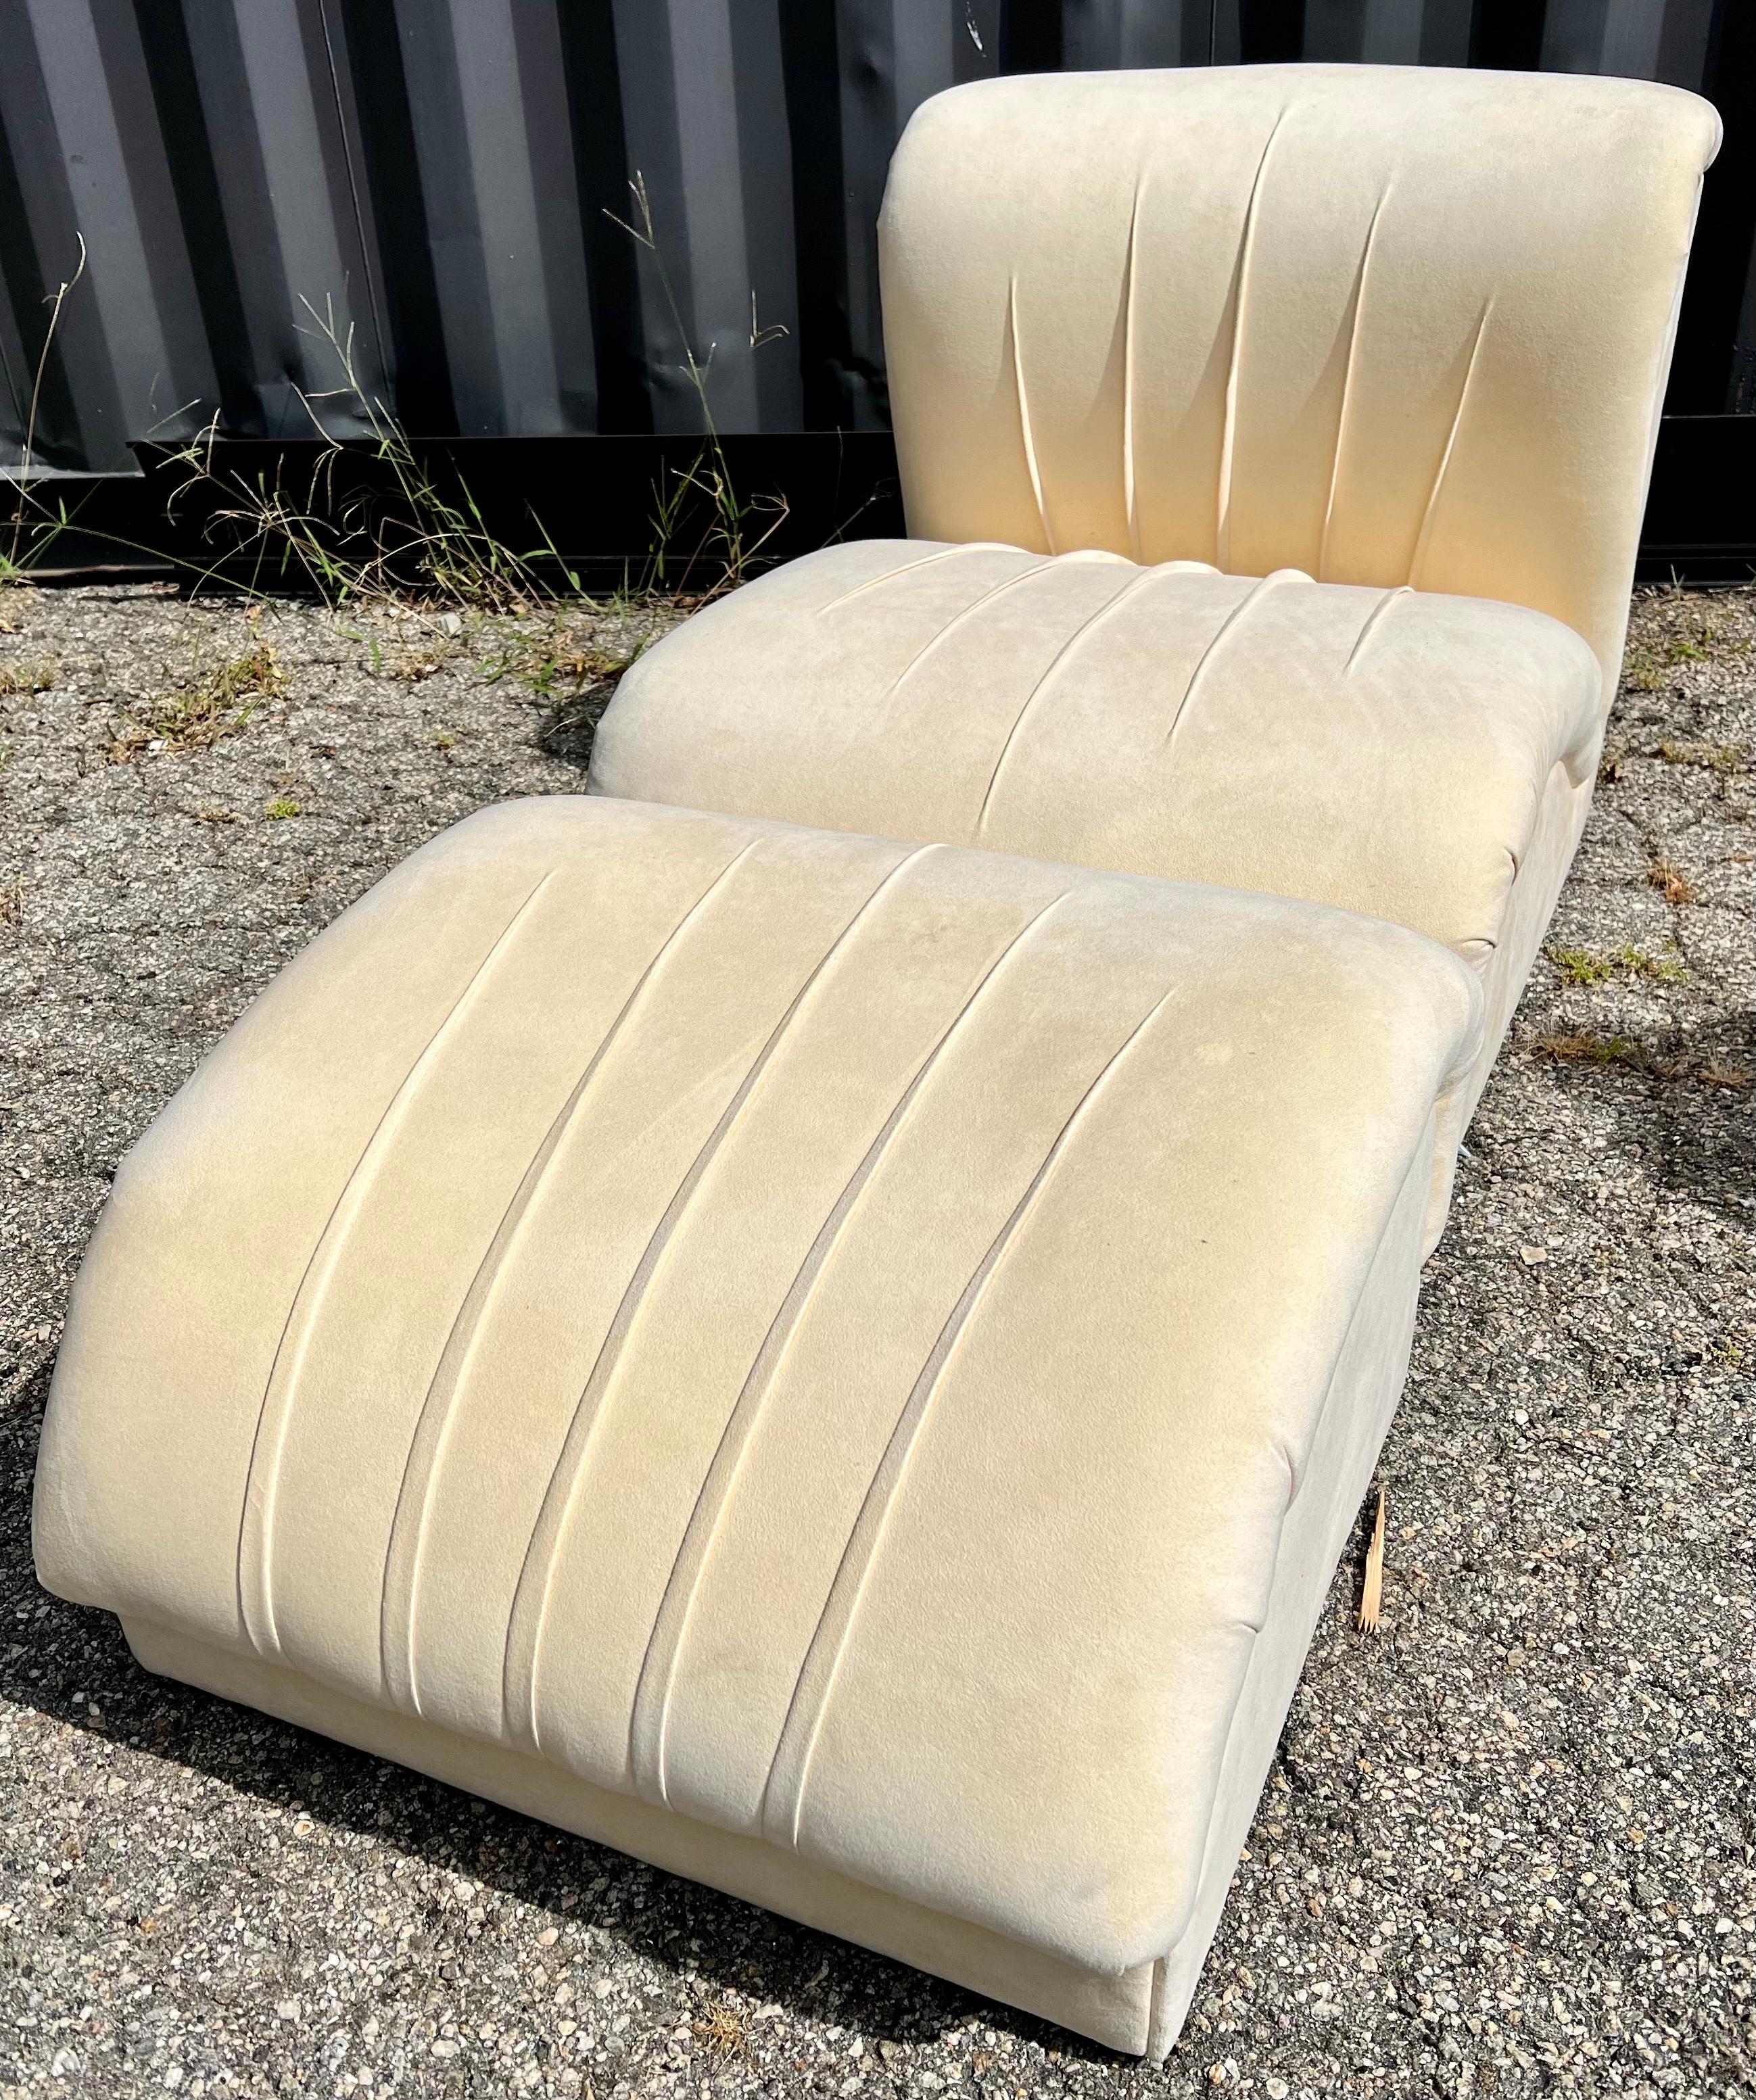 Mid-Century Modern custom pair of slipper chairs with one matching ottaman, three pieces in all. The upholstery appears to be original and is a cream colored suede. There is some age appropriate wear to the pieces and they could benefit from a